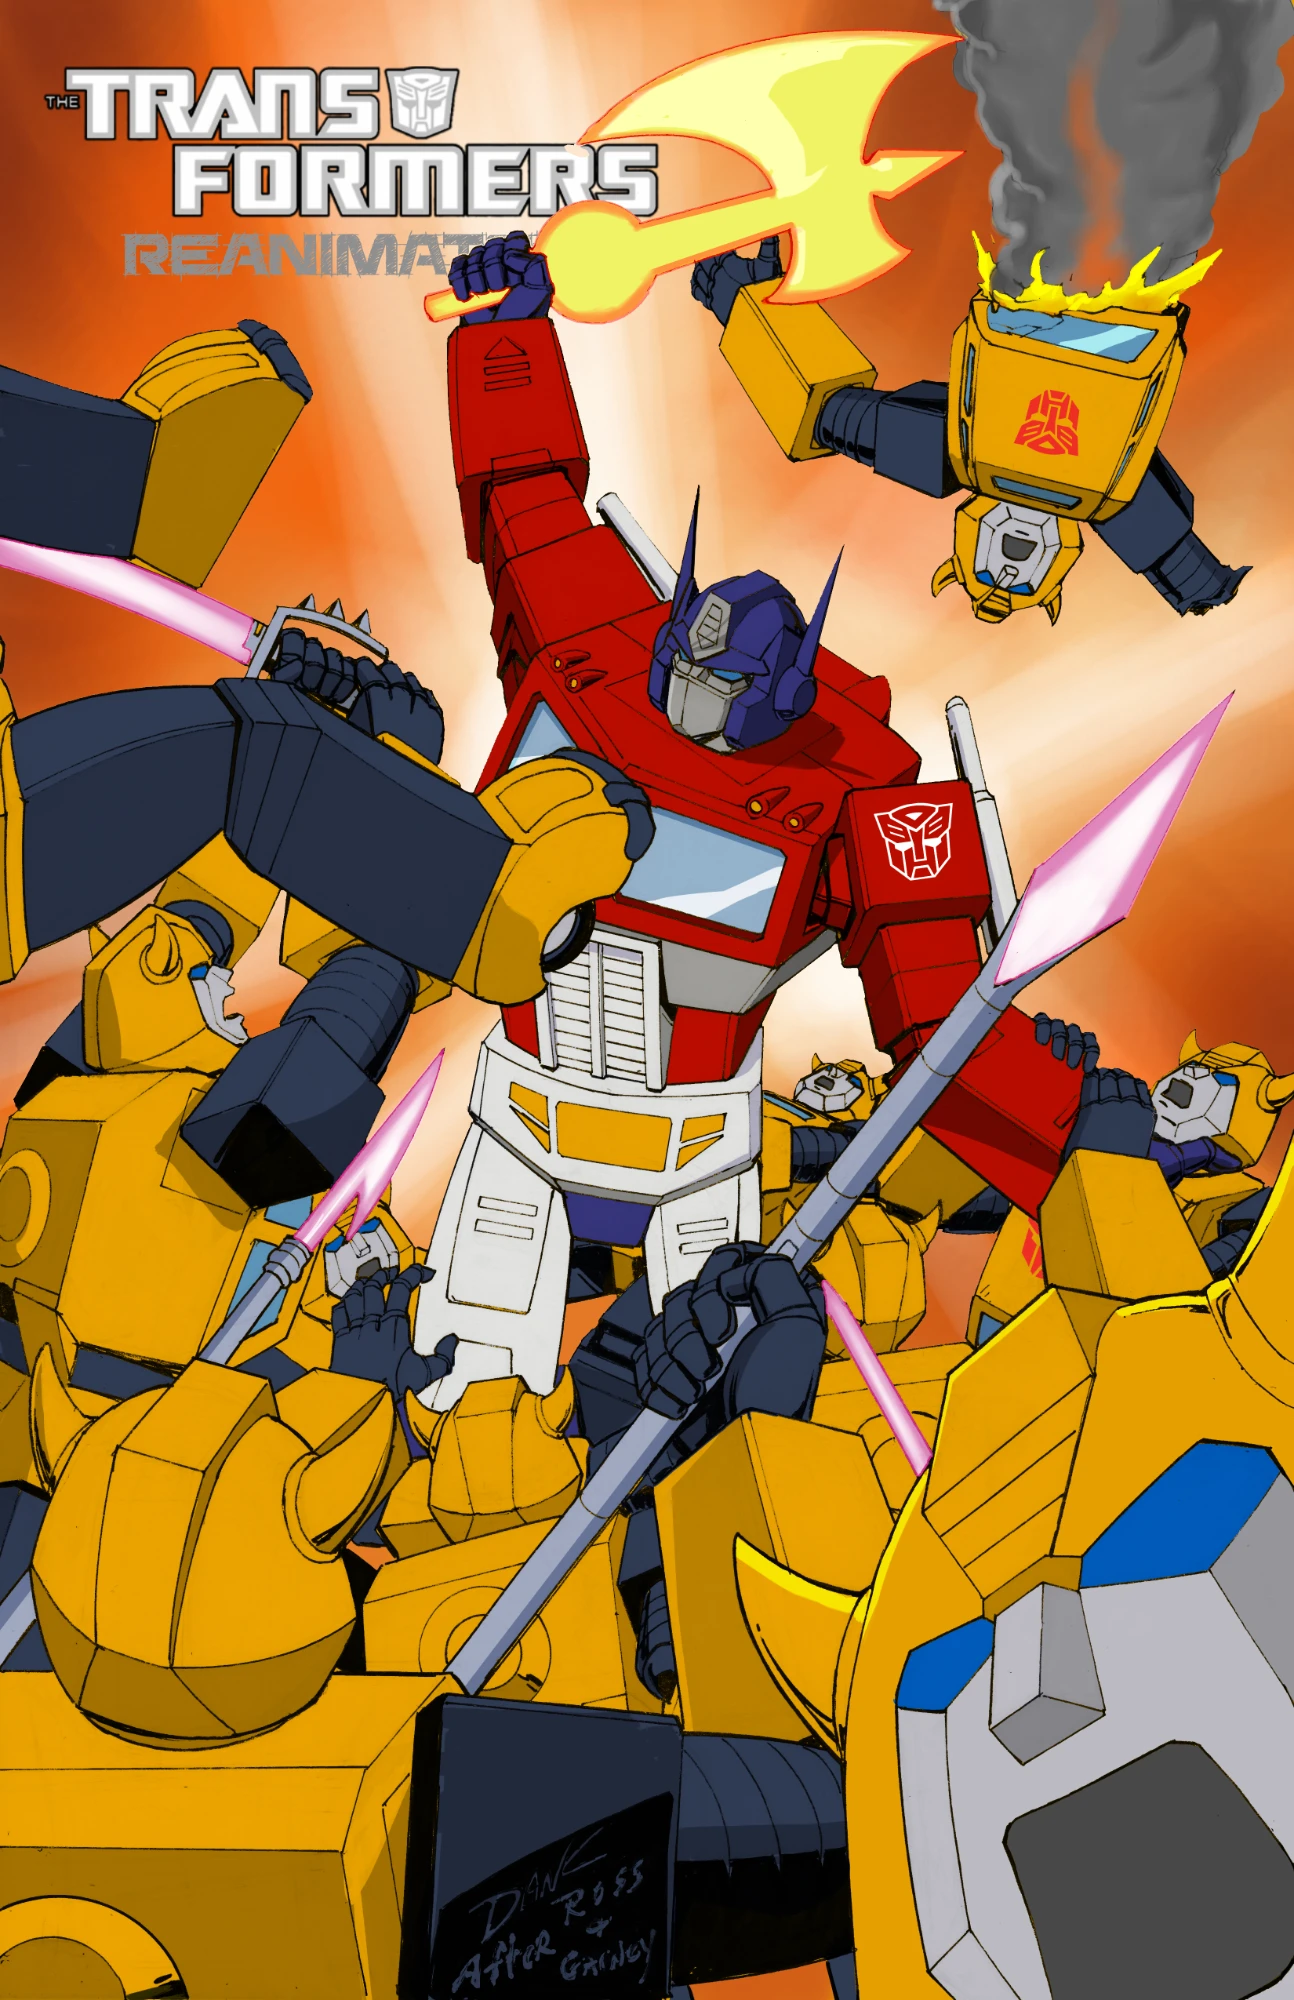 Transformers comic cover has Optimus Prime fighting off a swarm of Bumblebees with his Energon Axe